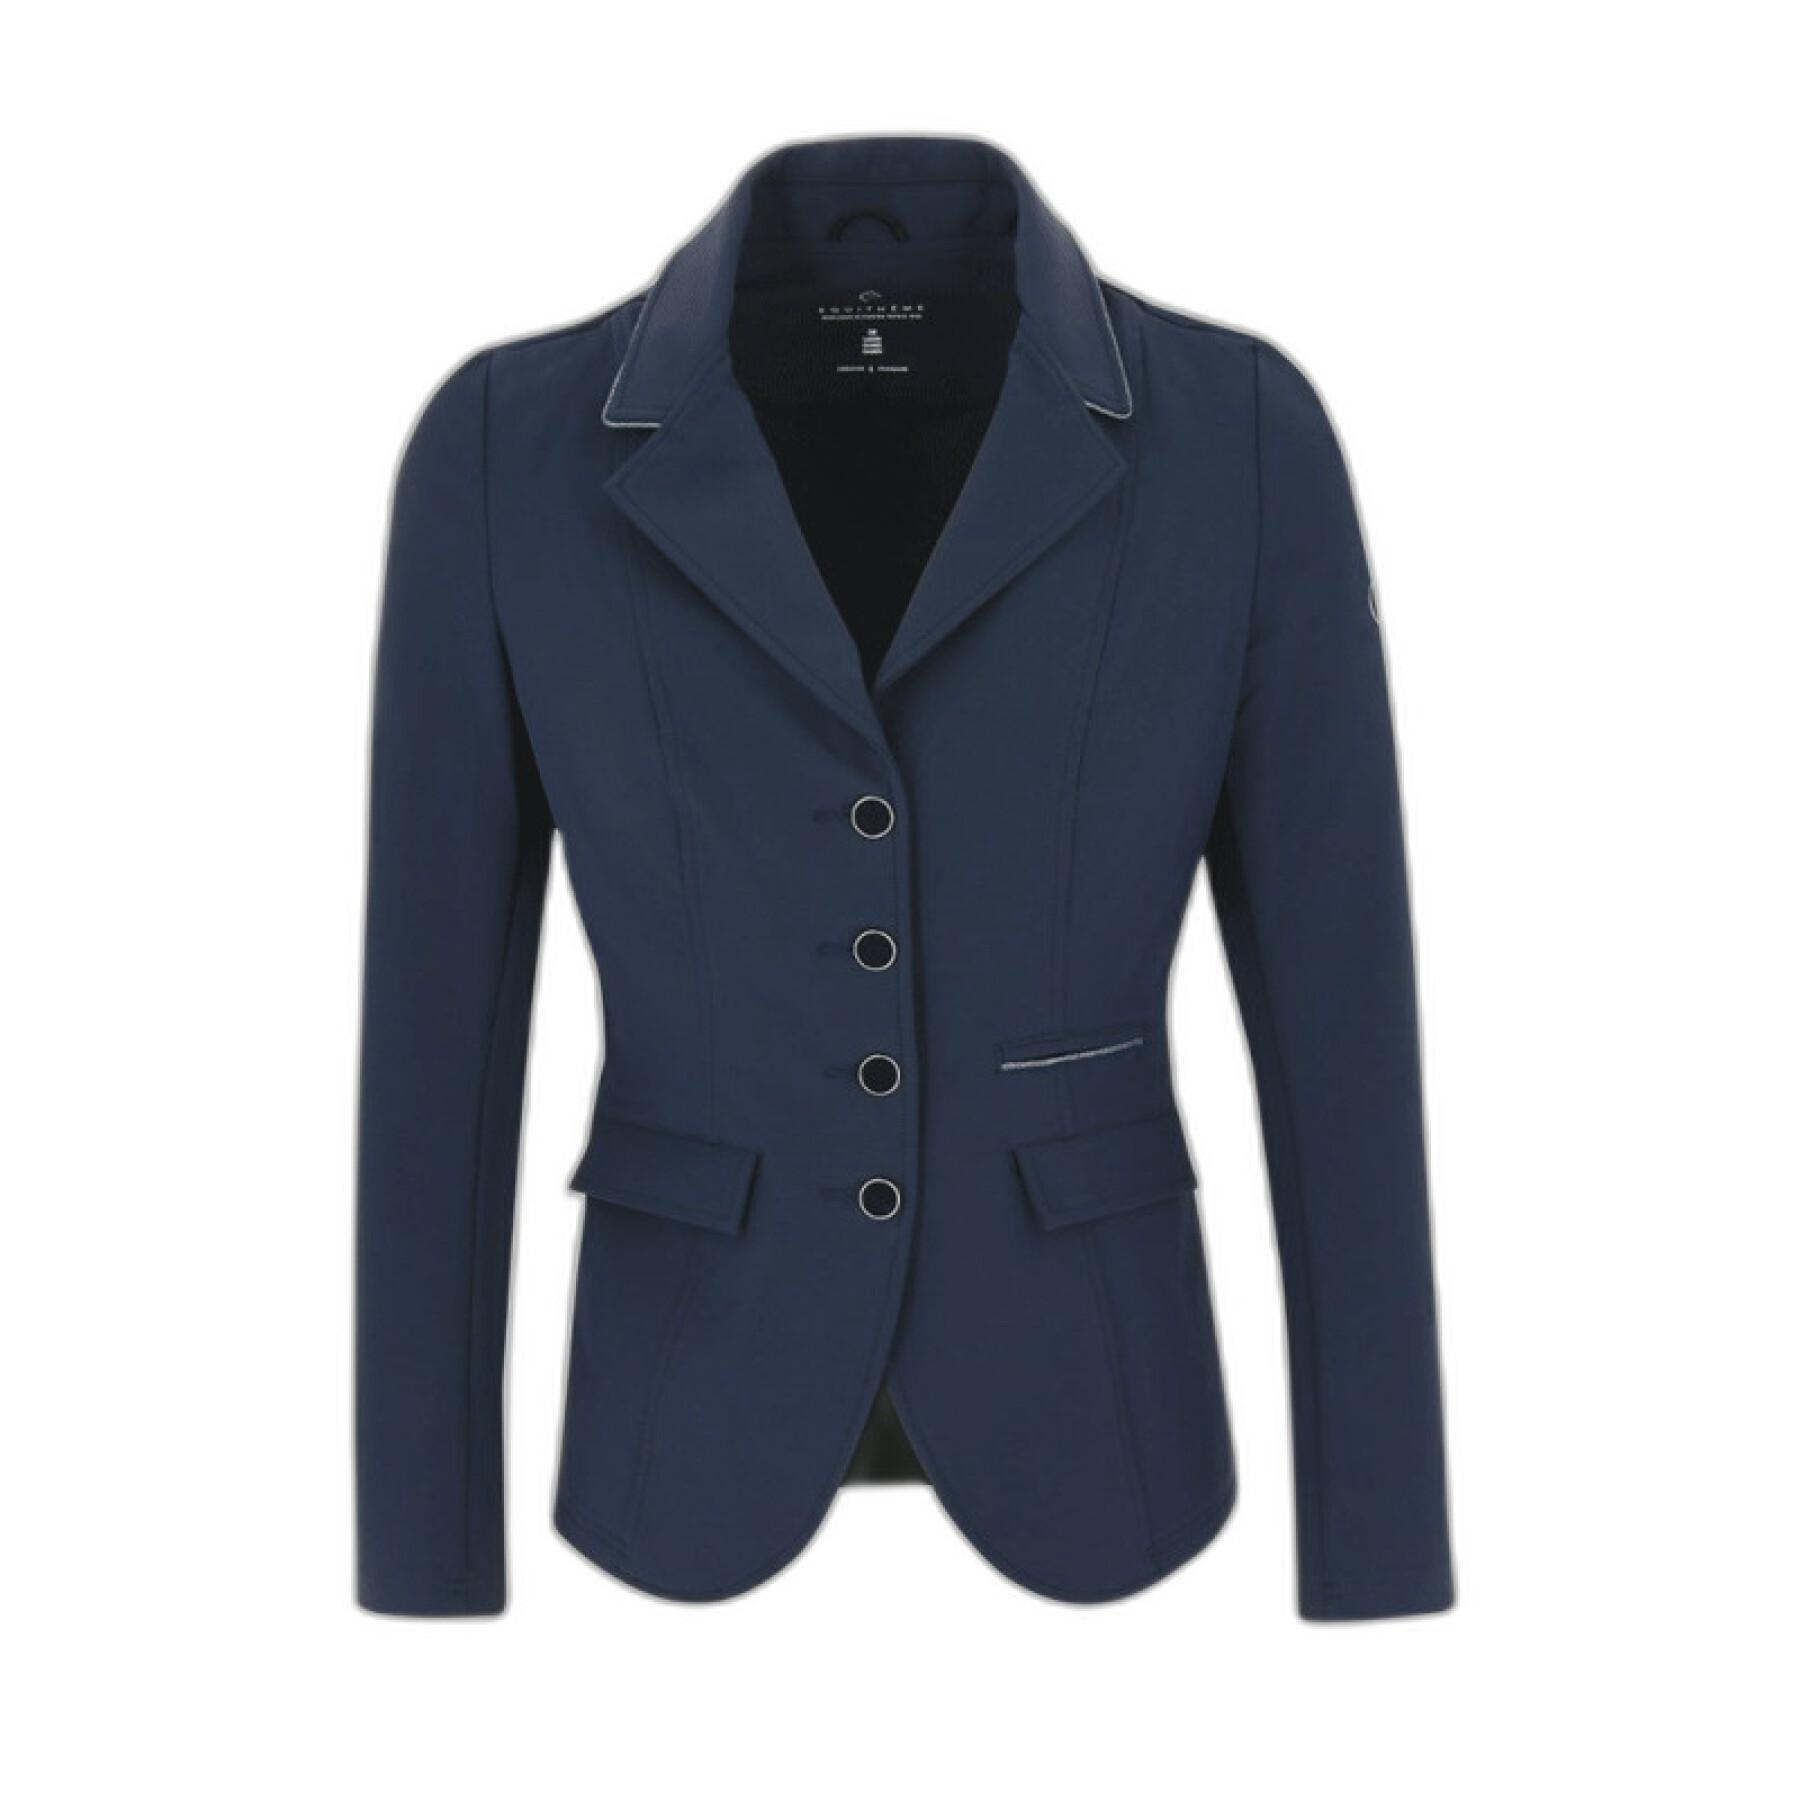 Riding jacket for girls Equithème Aachen